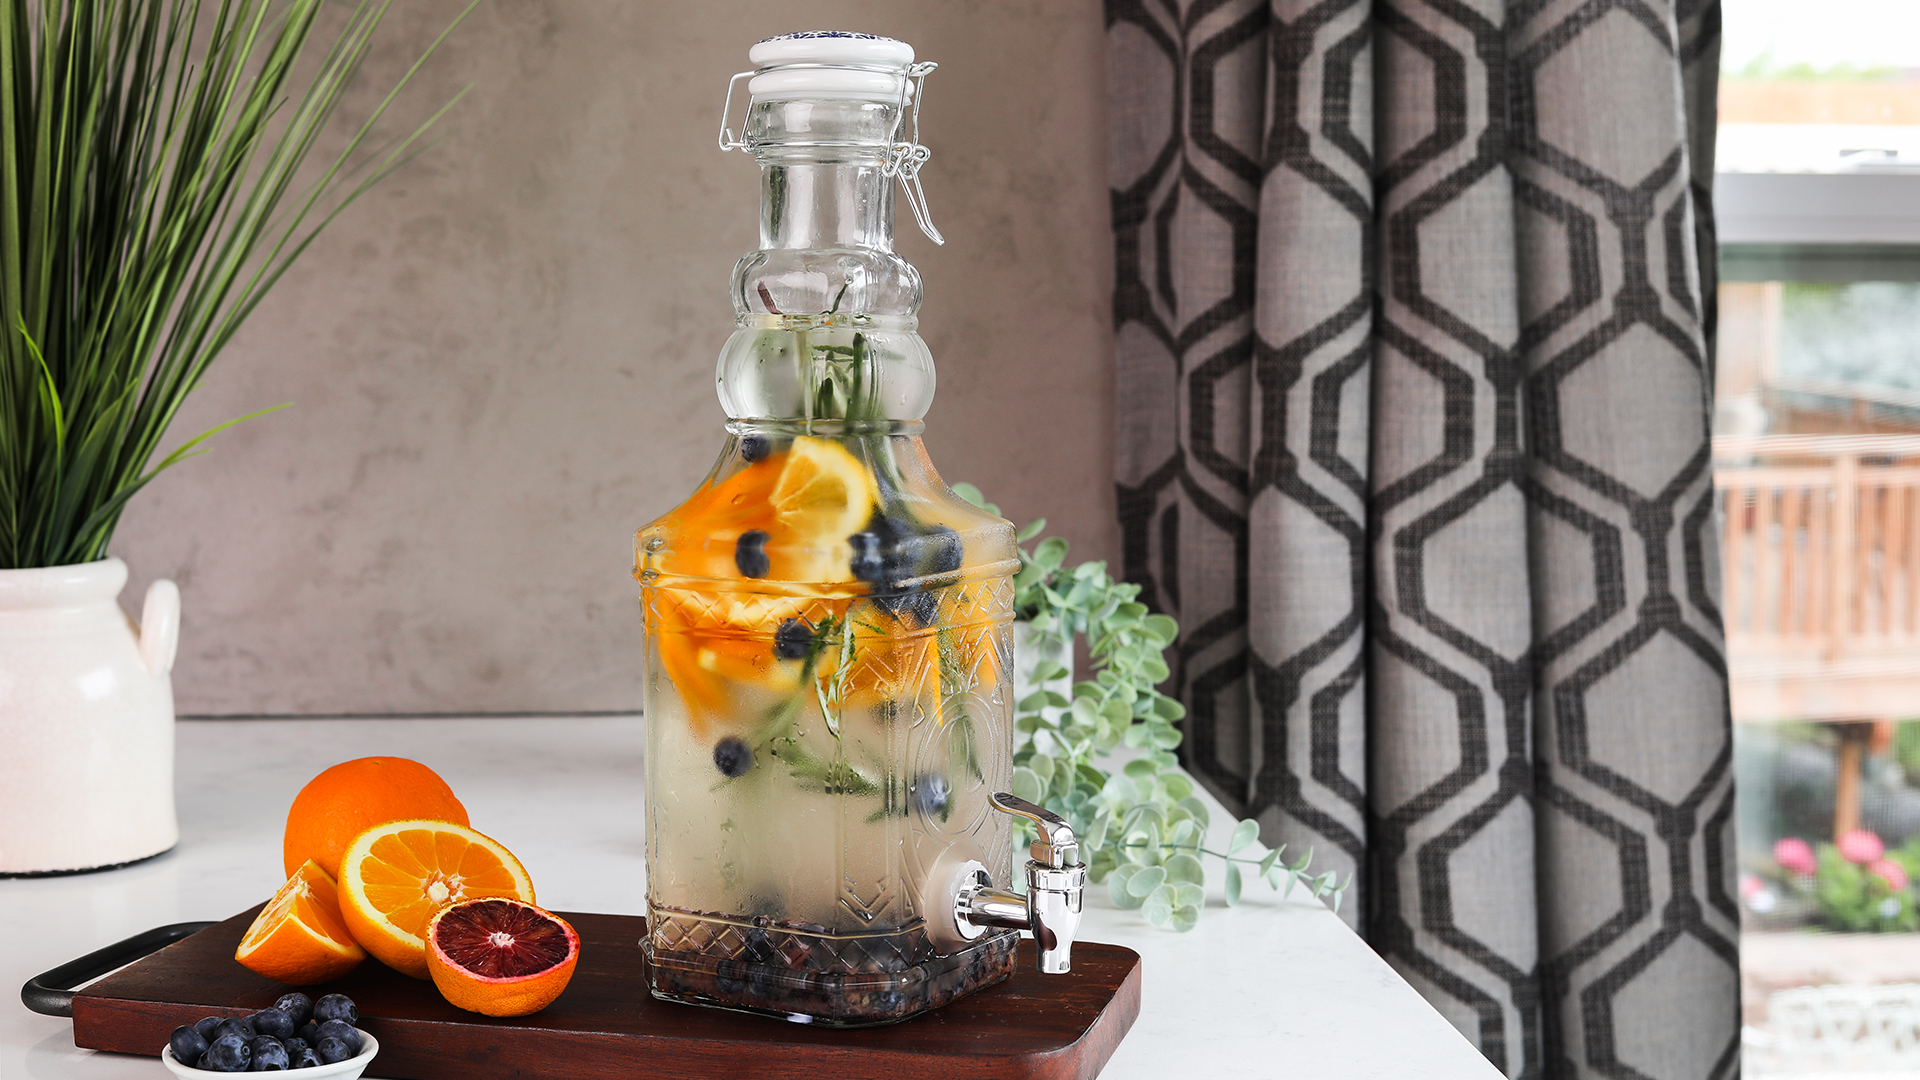 Blueberry orange water infusion